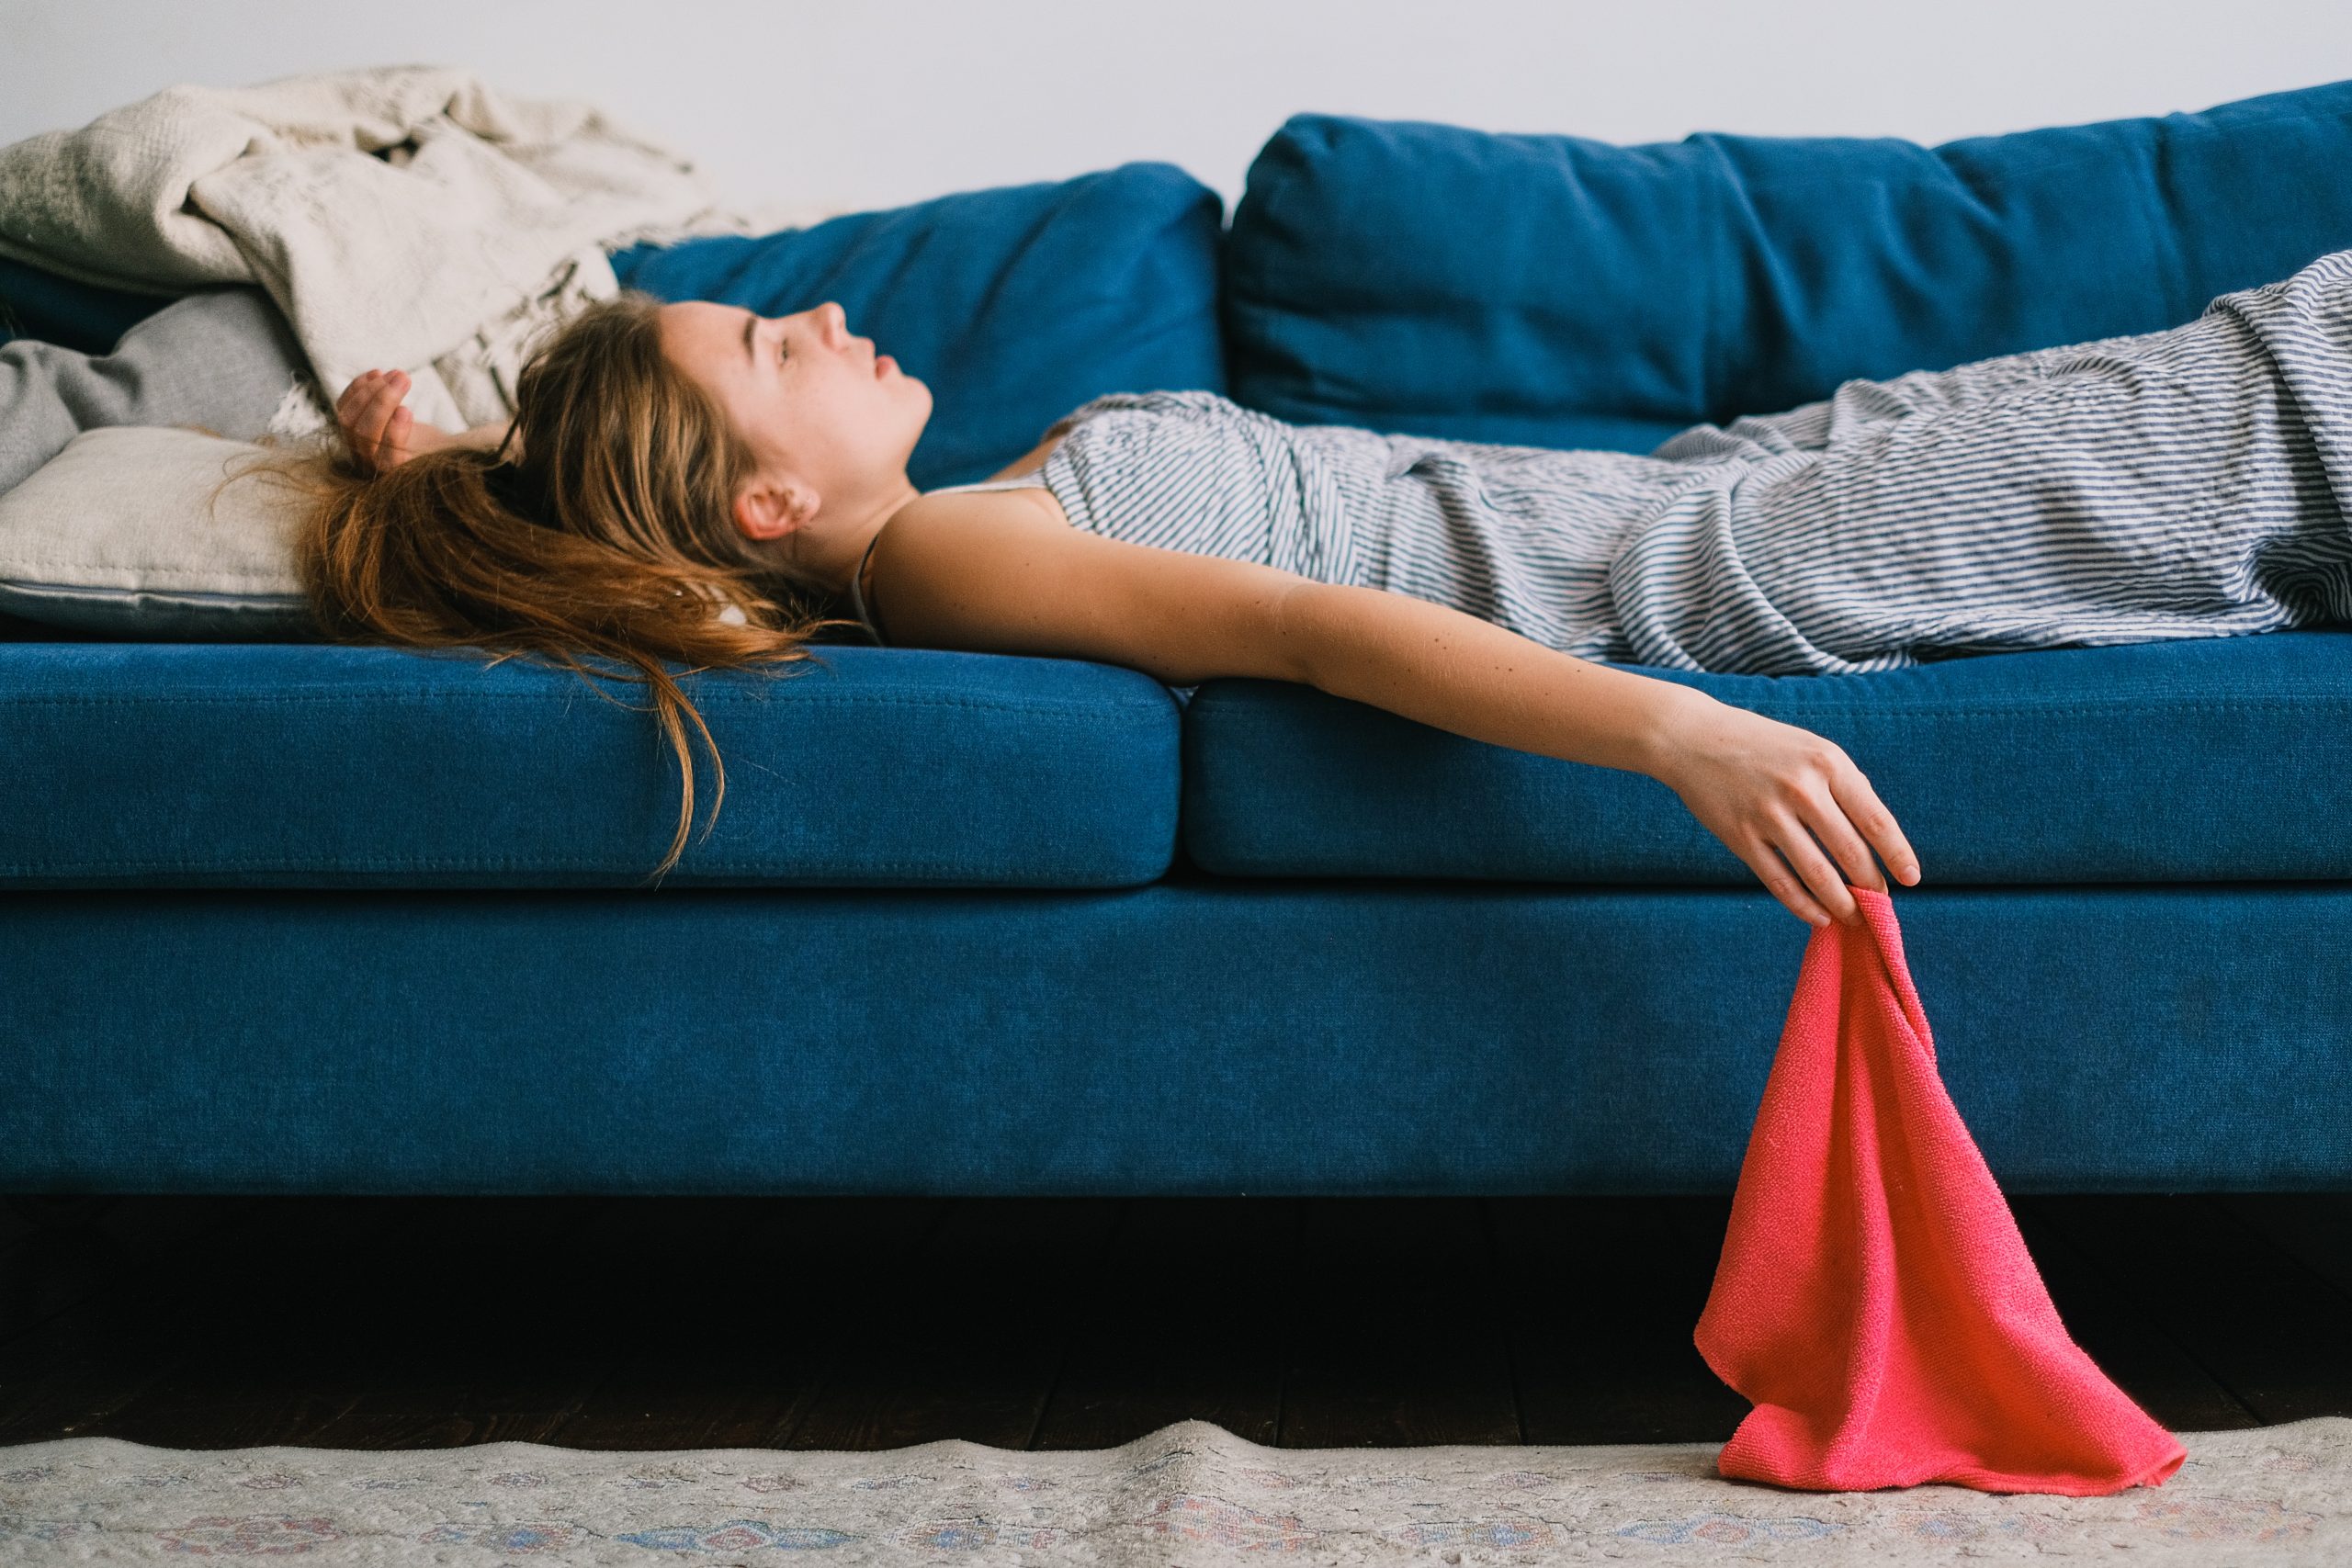 Lying down on a blue sofa, a young woman tries to keep cool with a red hand towel.